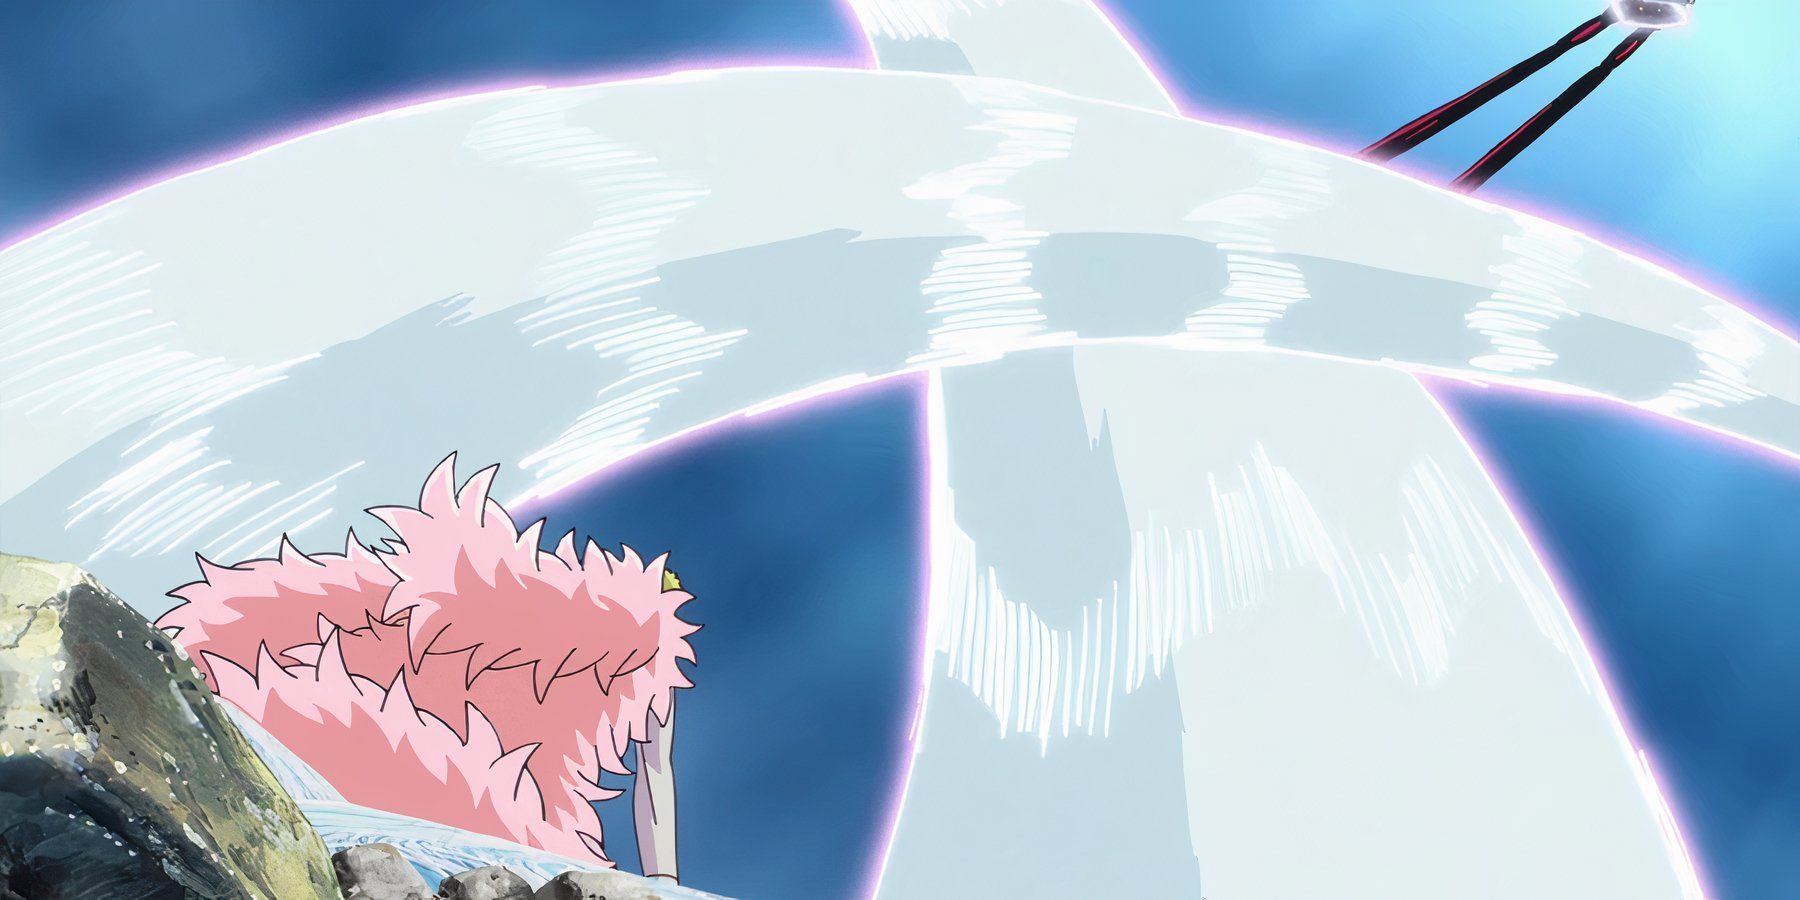 Doflamingo uses Off White to block Luffy's Gear 4 attack during their final fight in One Piece's Dressrosa Arc.